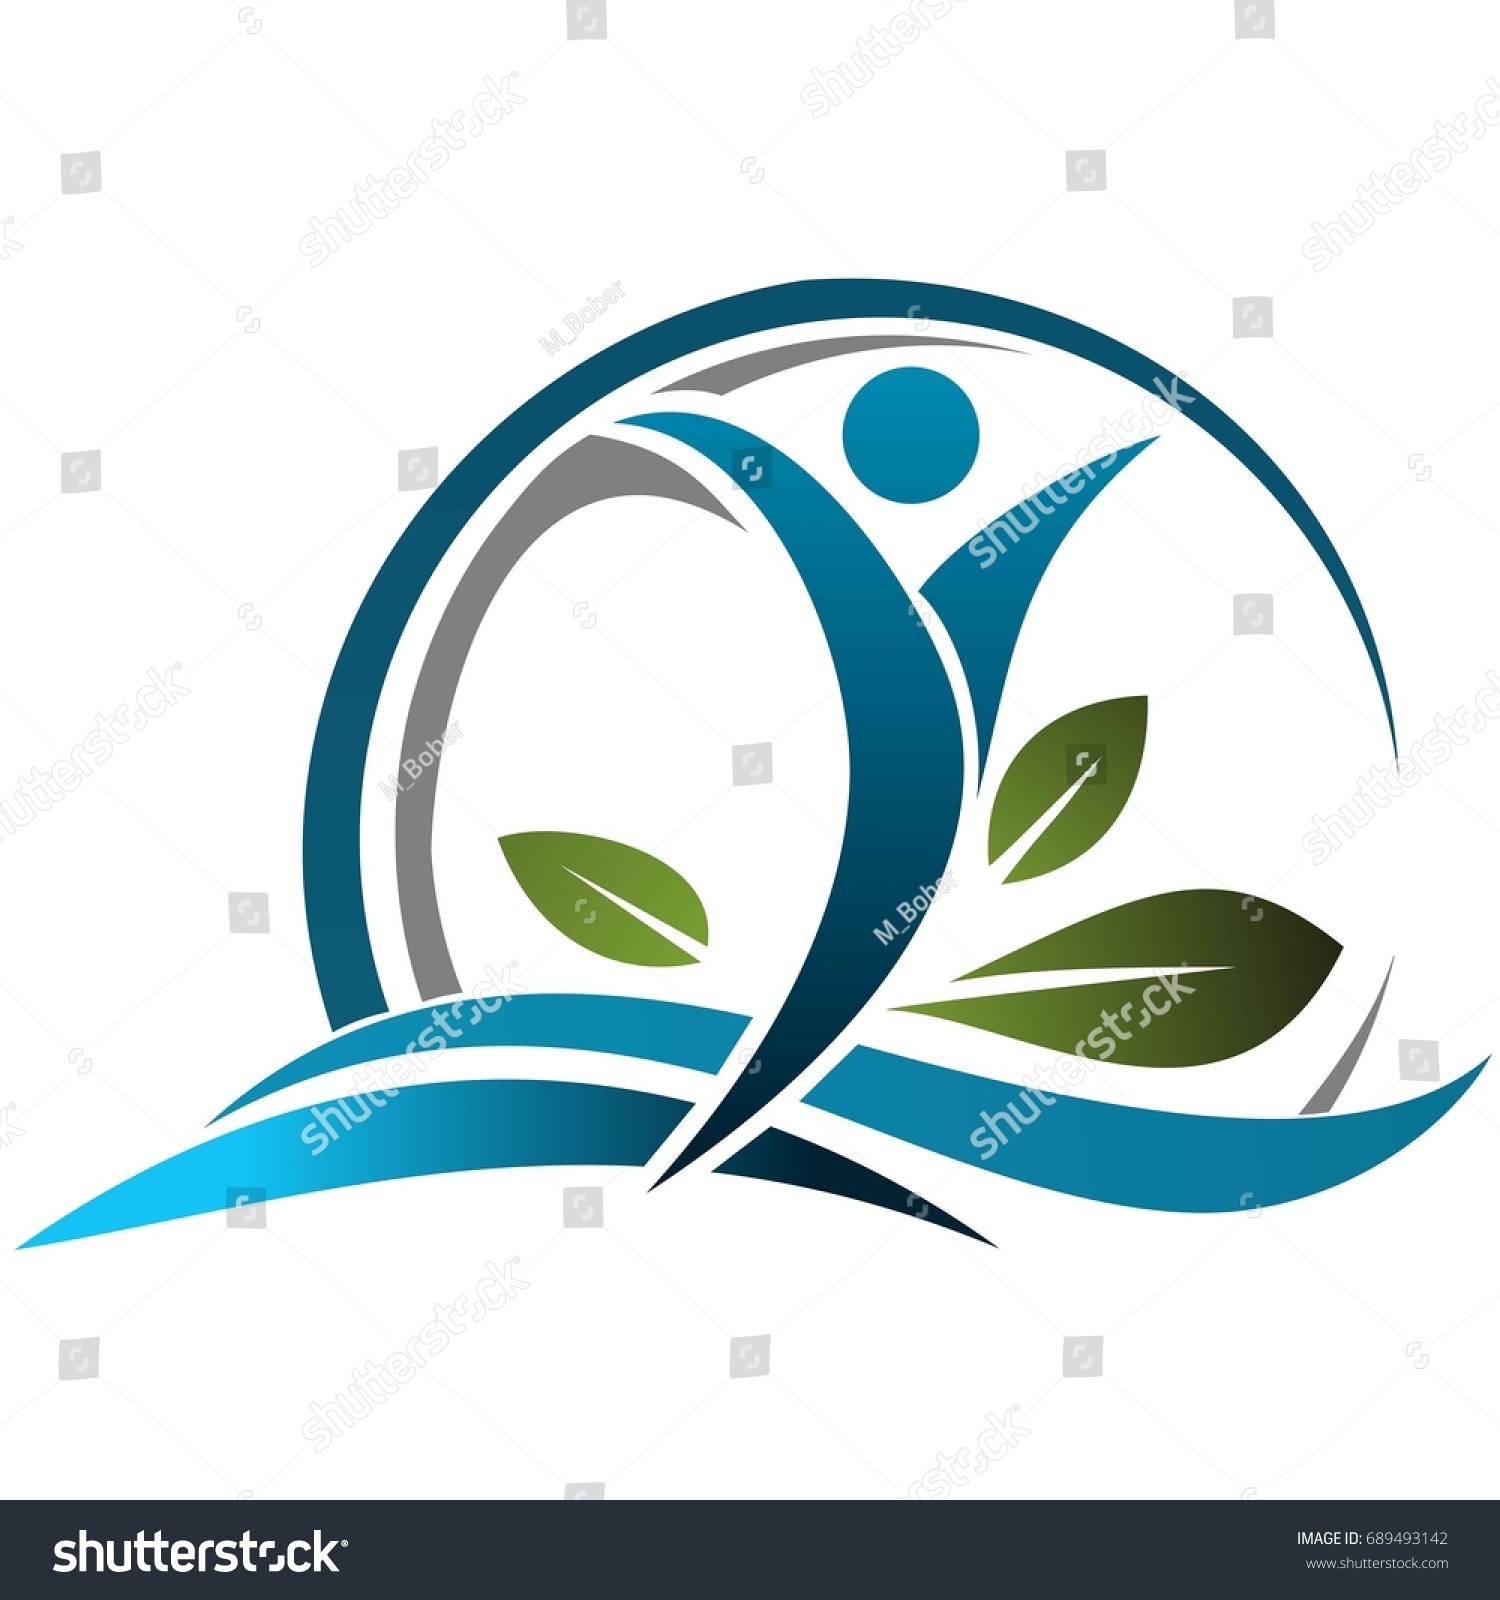 Download Human Conjunction Nature Circle Stock Vector Royalty Free 689493142